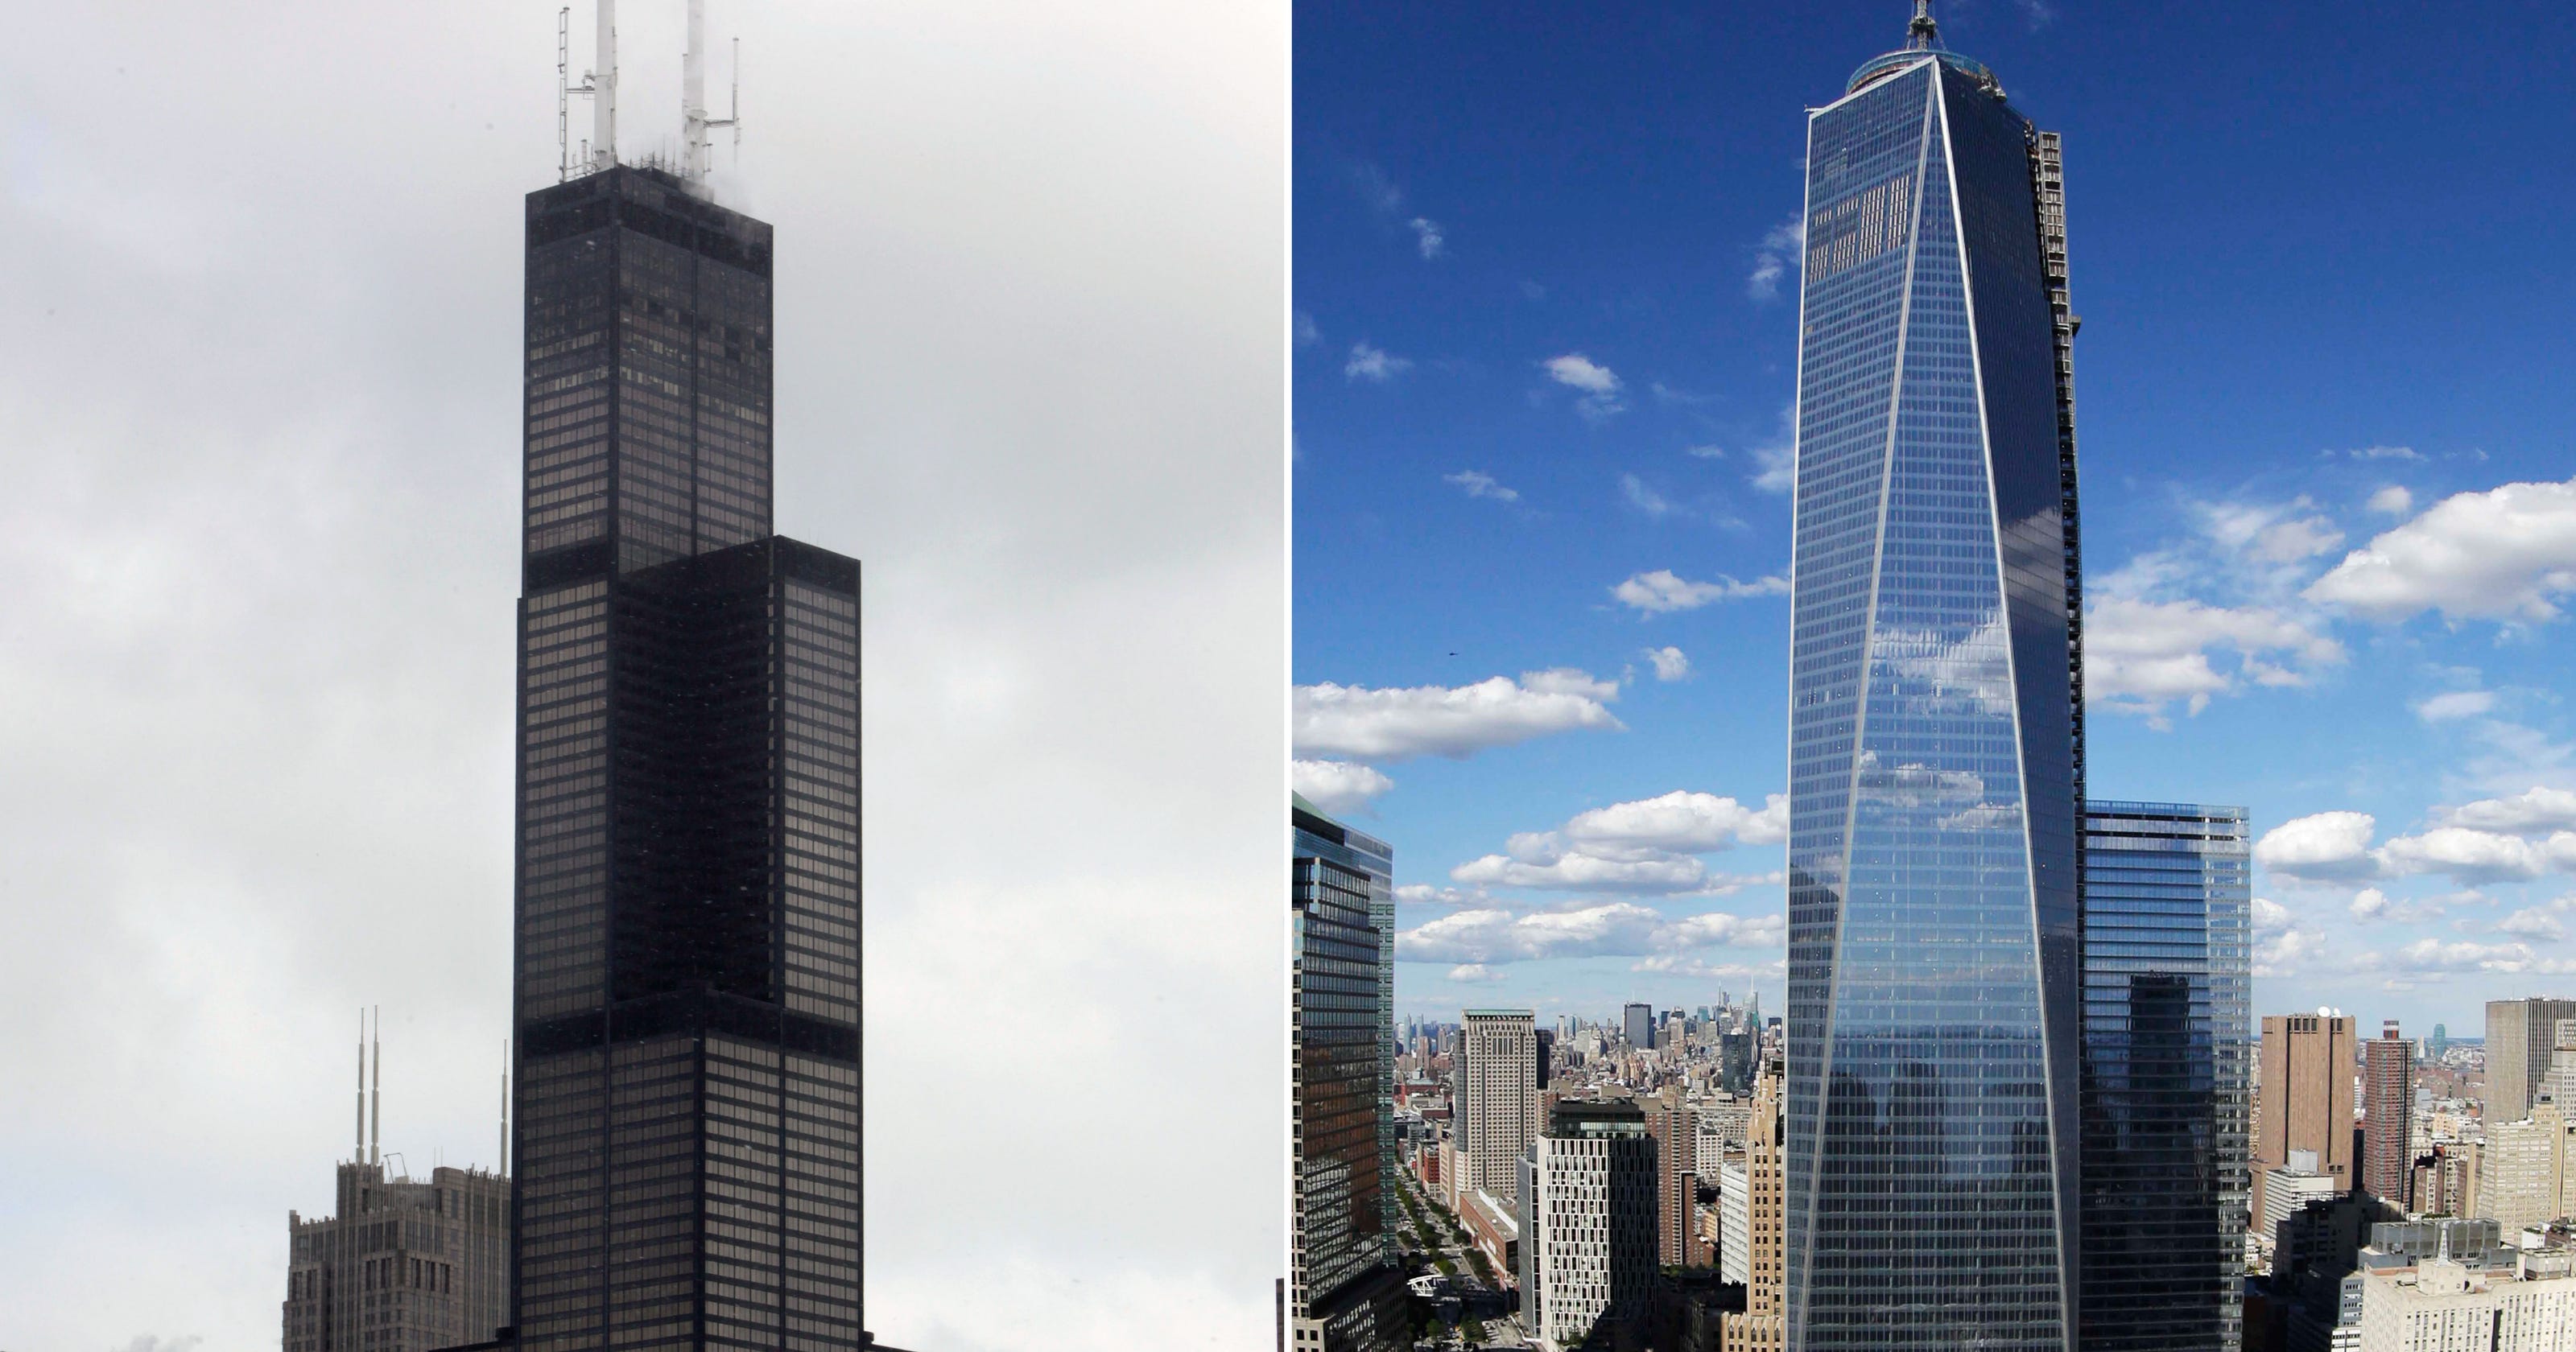 It's official World Trade Center is USA's tallest building